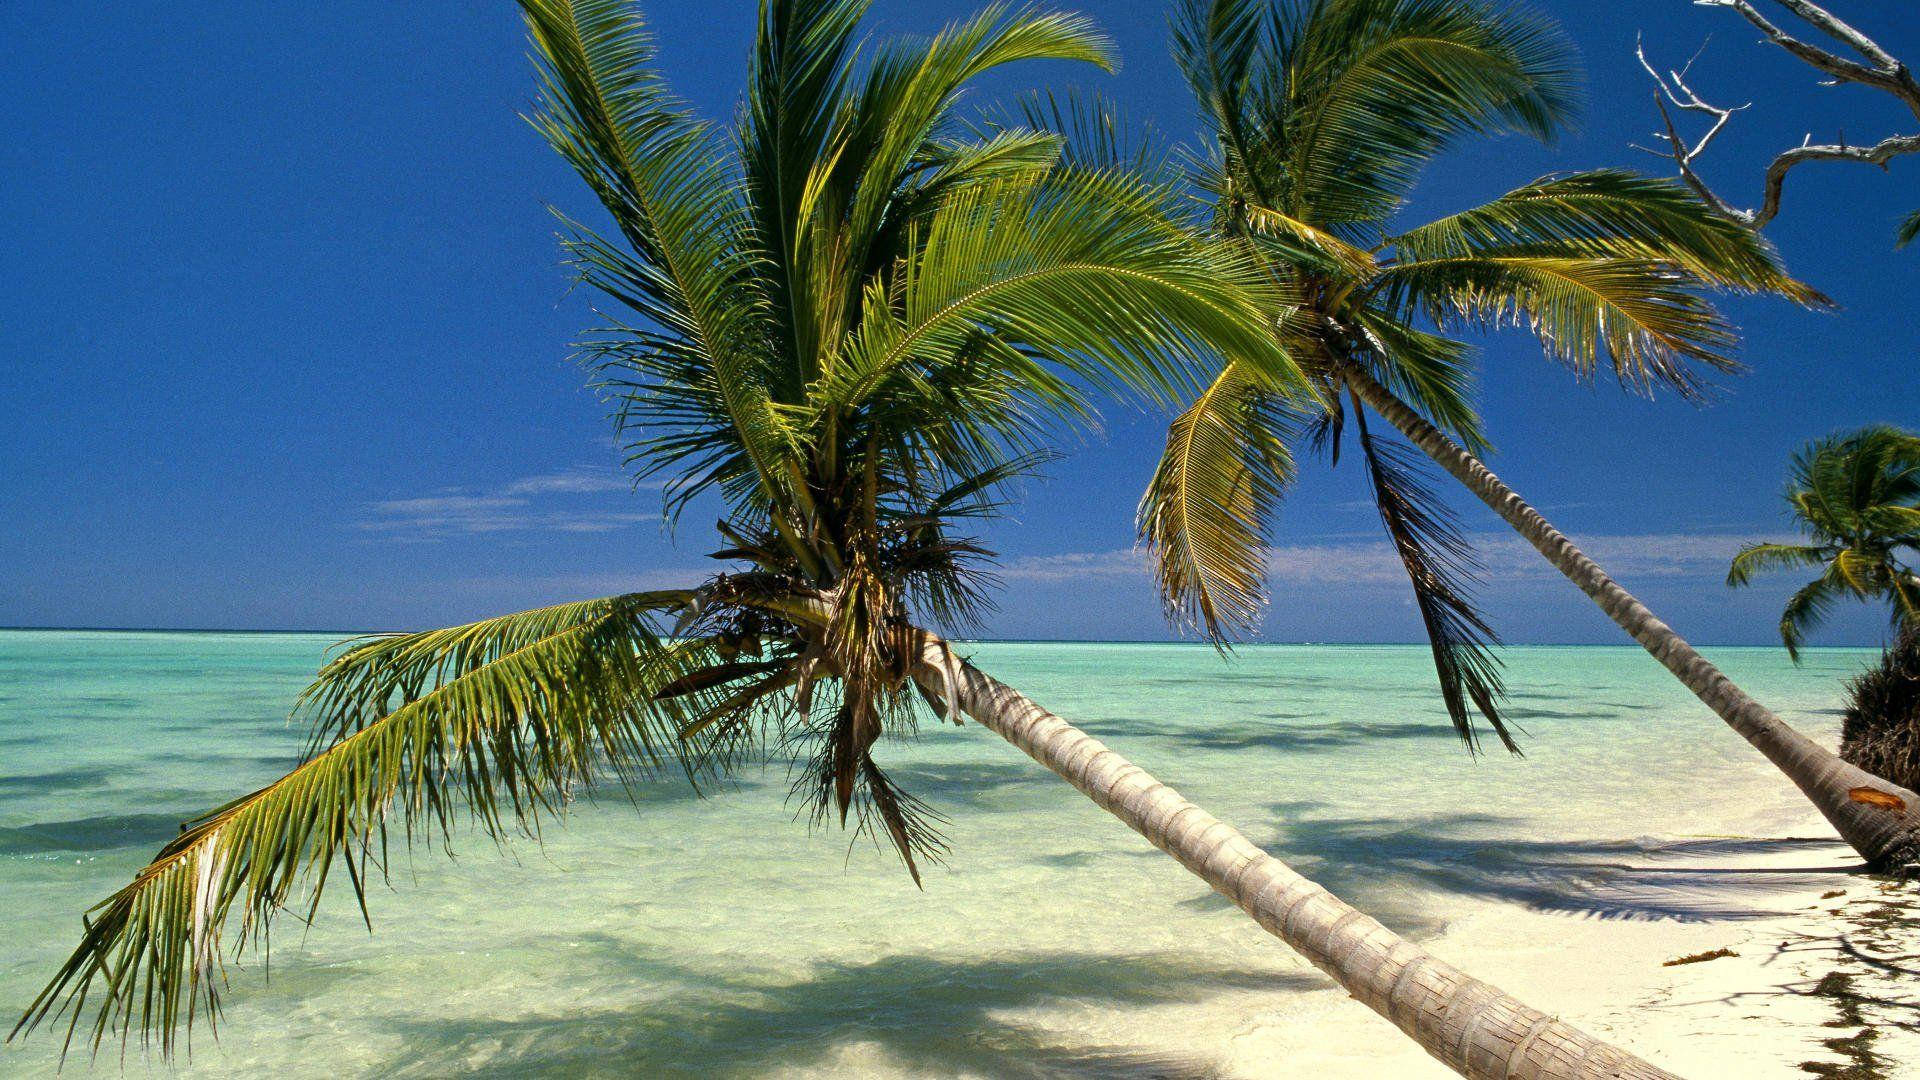 Leaning Dominican Republic Palm Trees Wallpaper